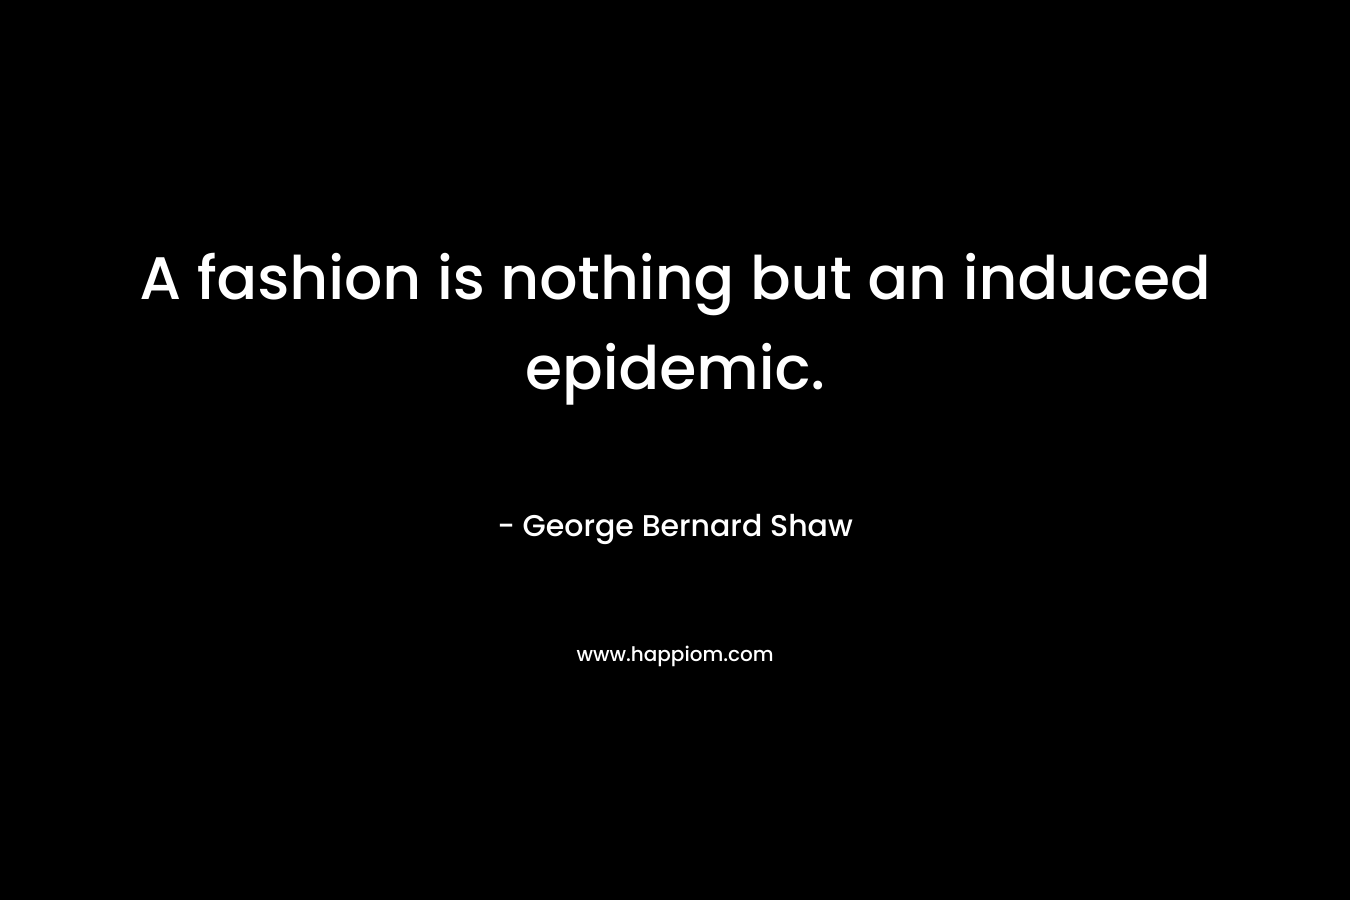 A fashion is nothing but an induced epidemic.